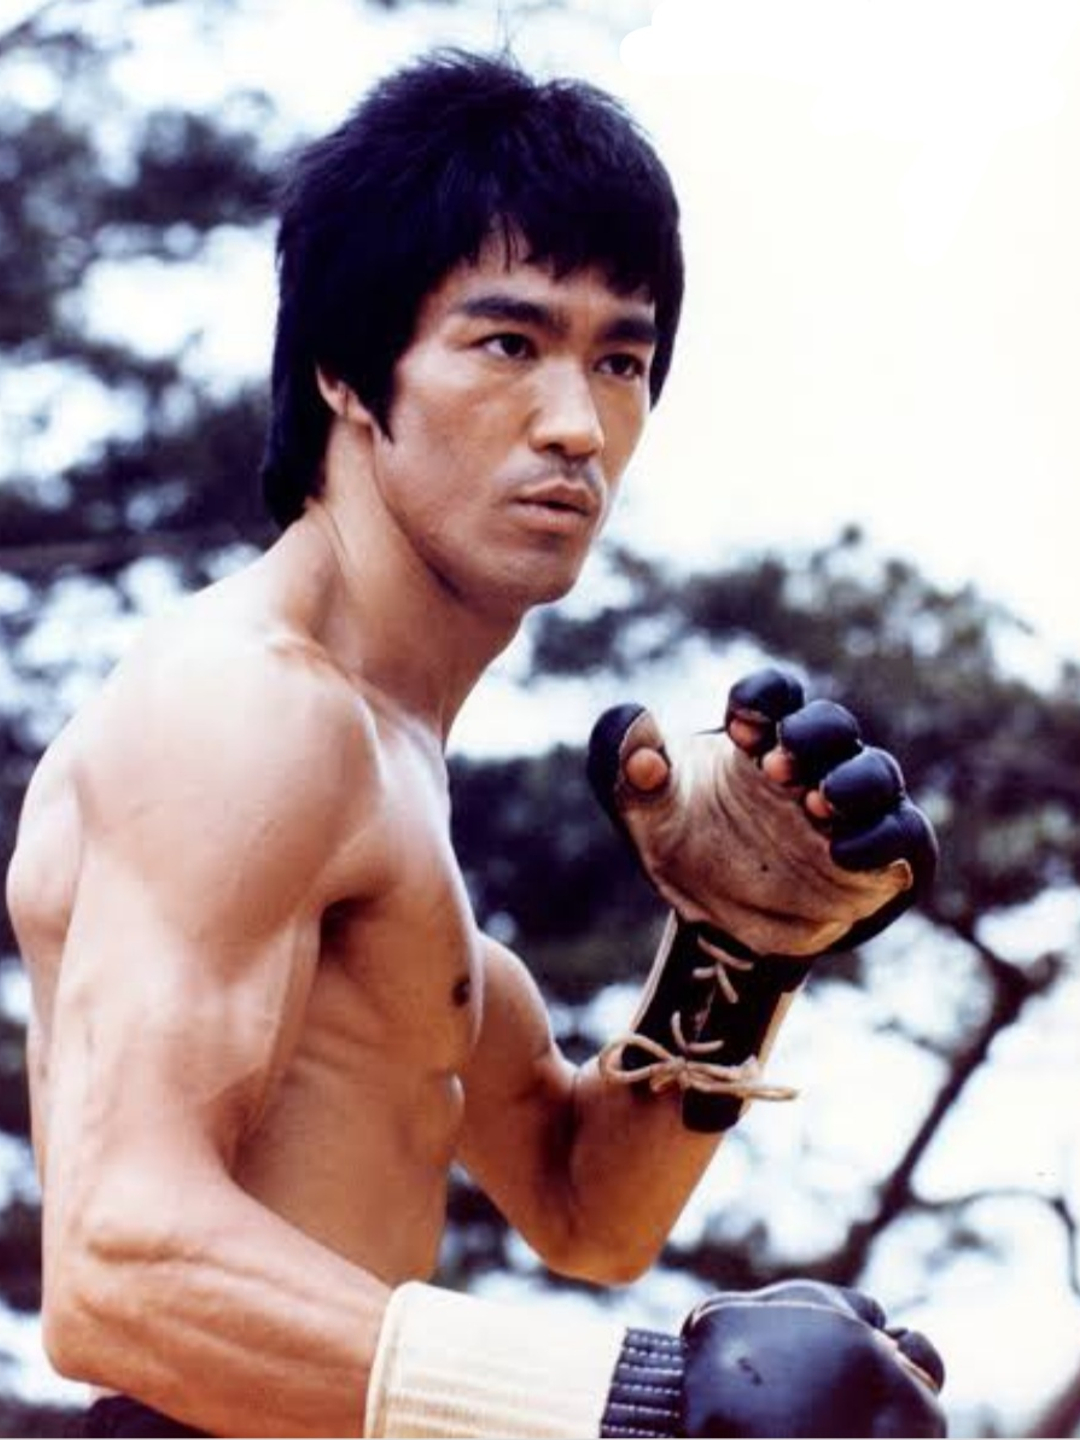 Bruce Lee early life